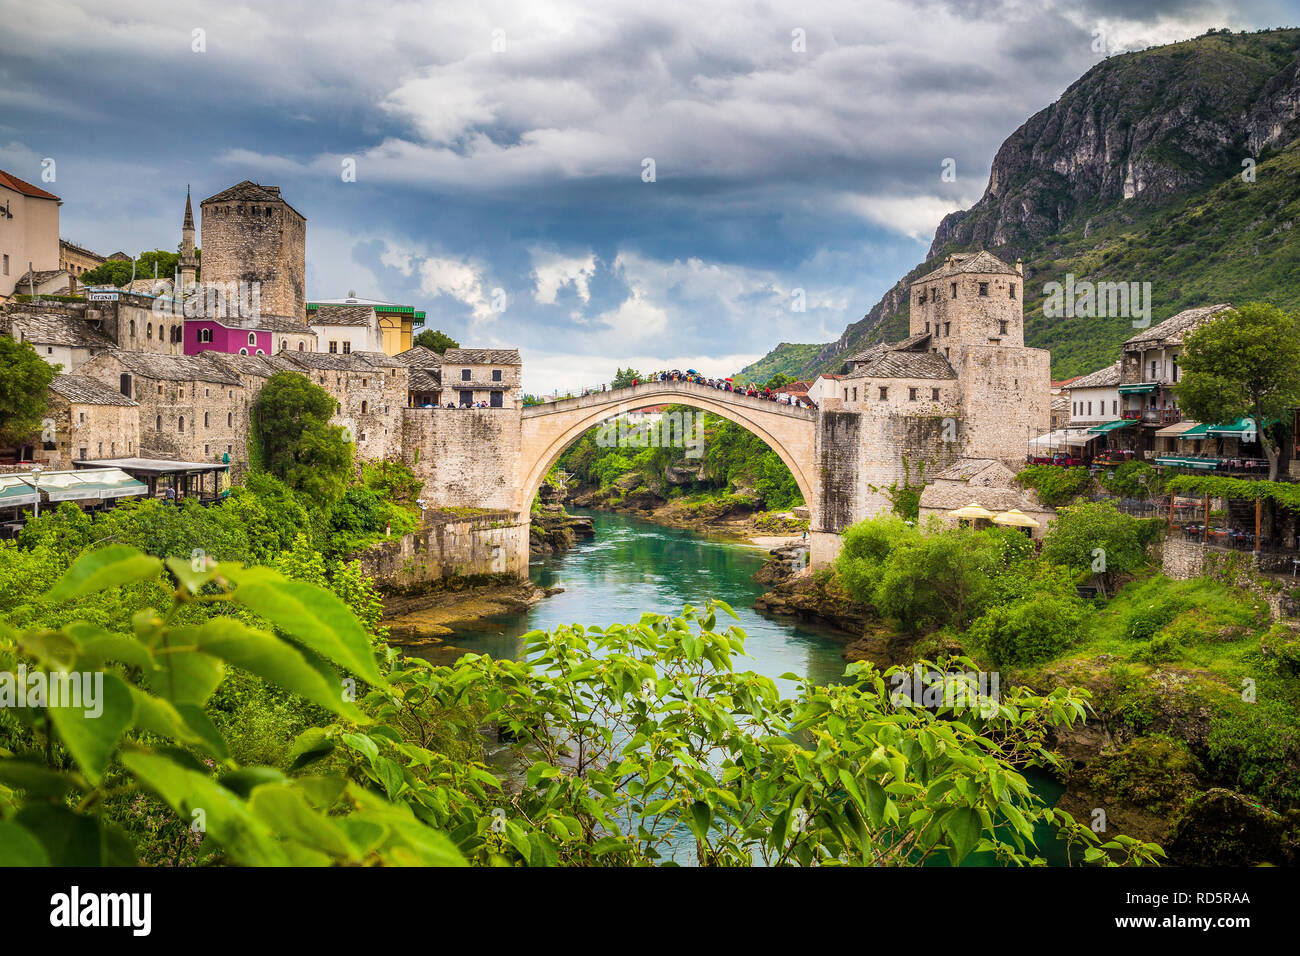 Panoramic aerial view of the historic town of Mostar with famous Old Bridge (Stari Most), a UNESCO World Heritage Site since 2005 Stock Photo